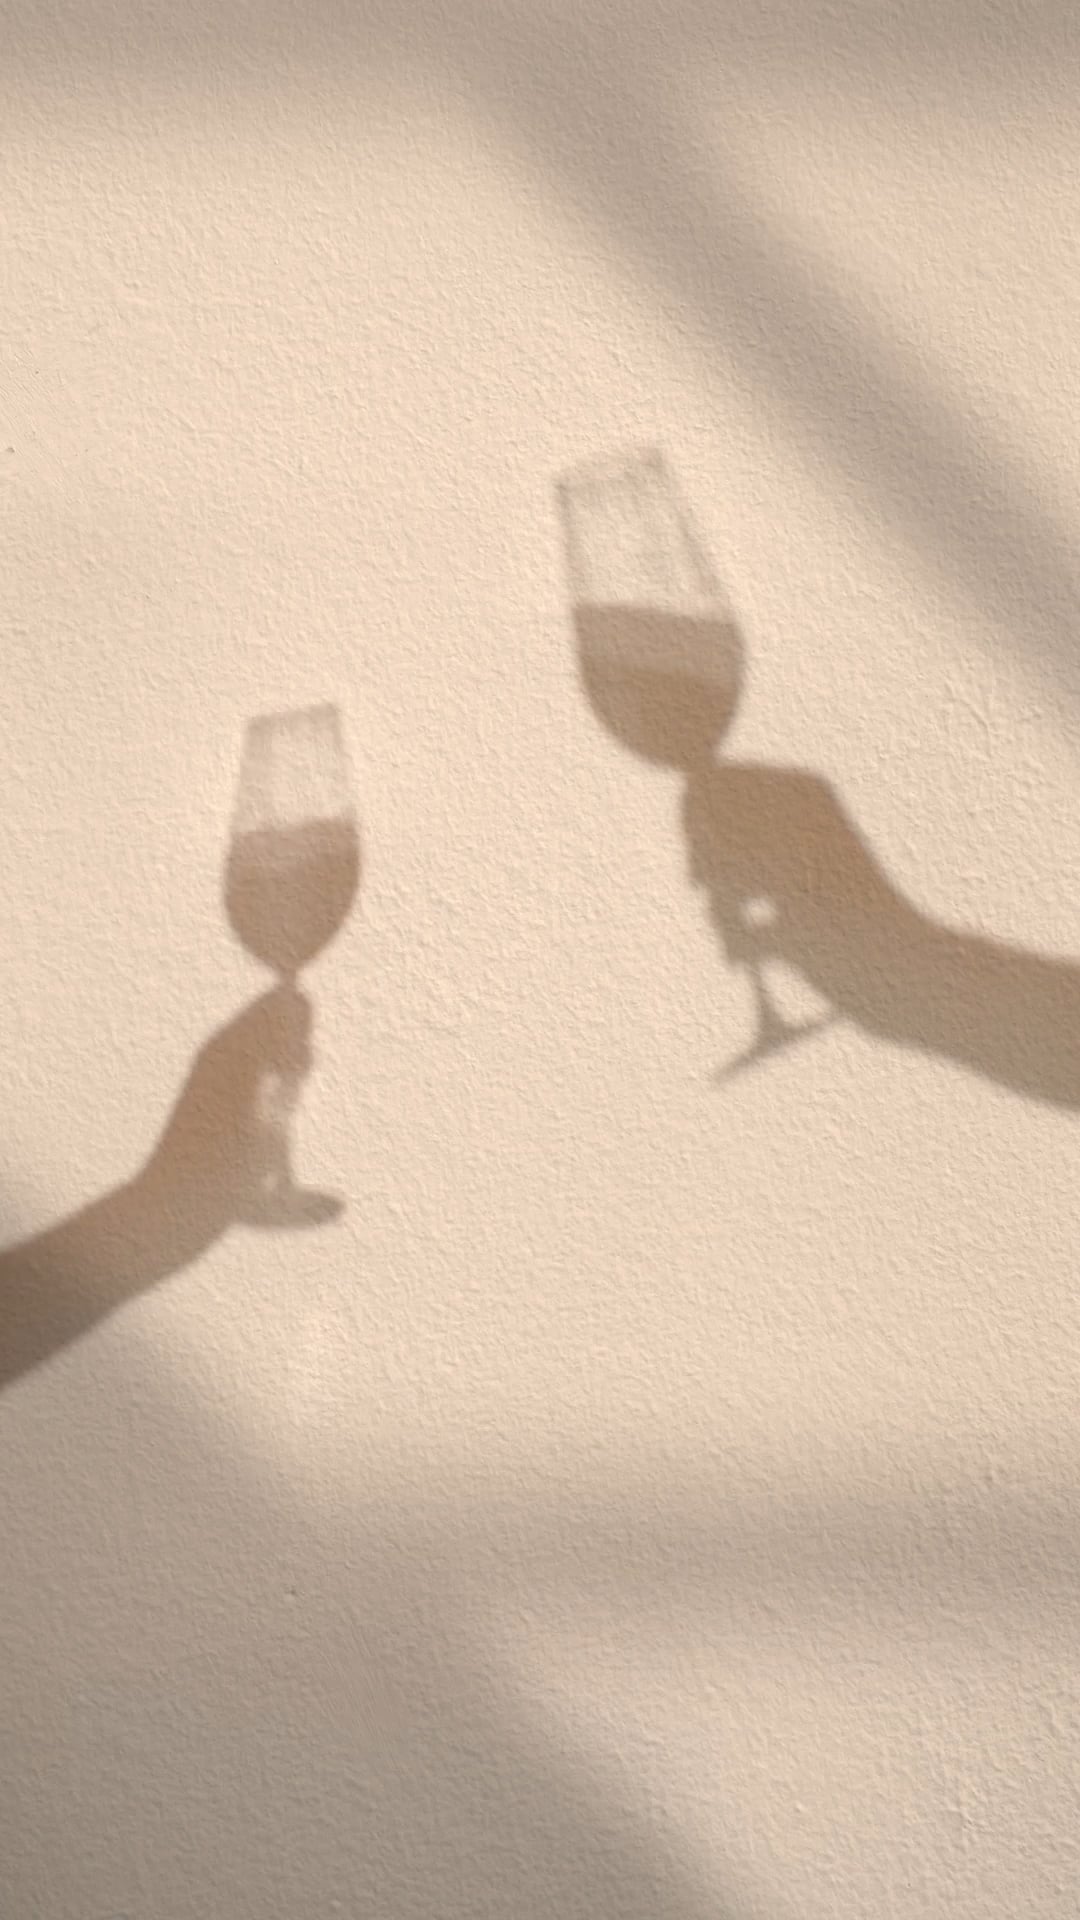 A picture of two hands holding wine glasses against a white wall. - Champagne